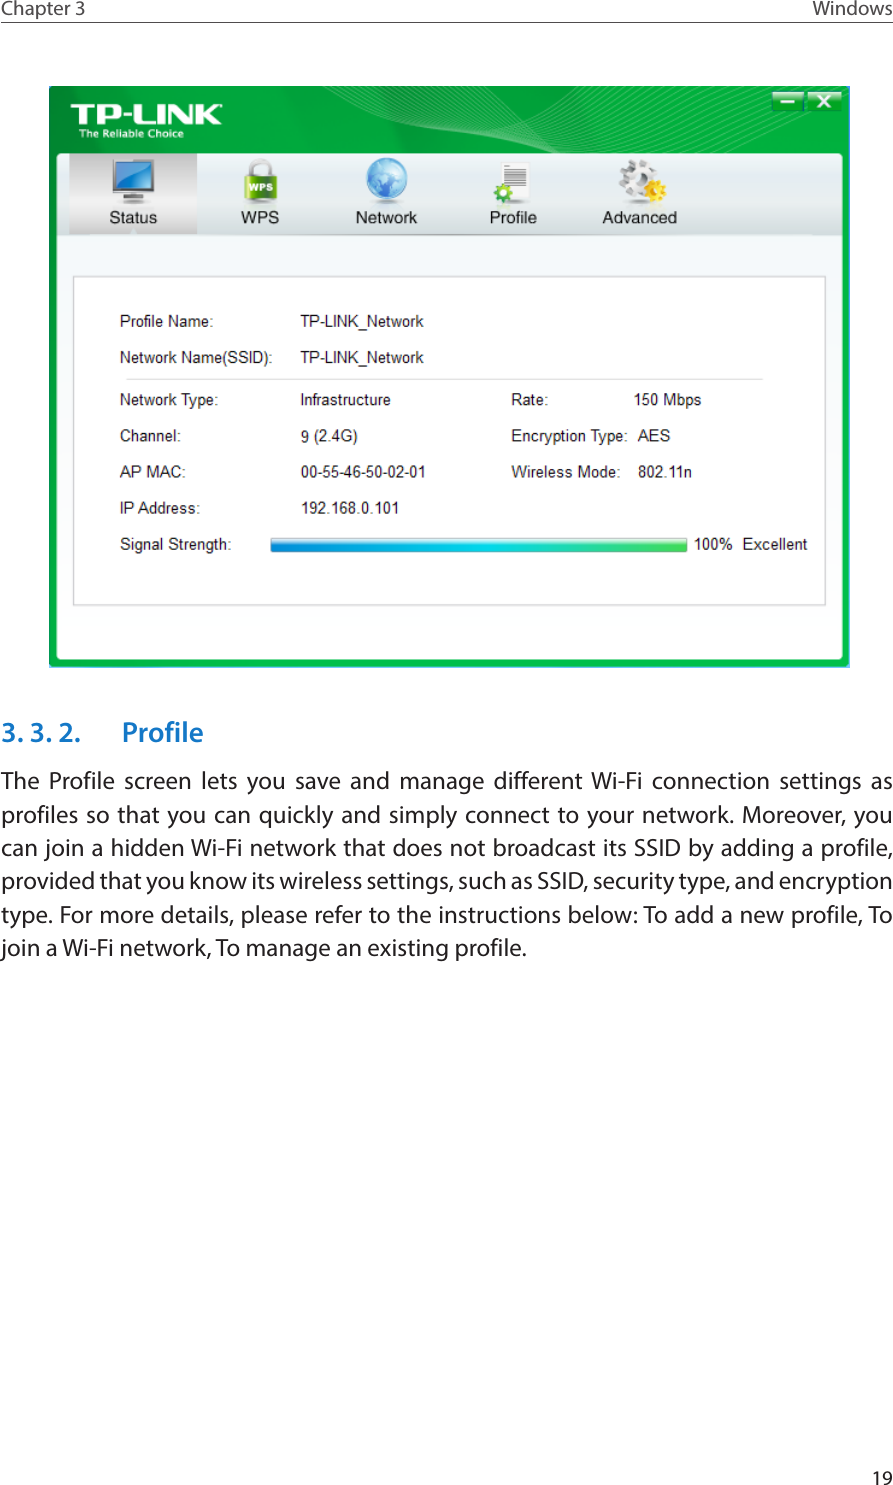 19Chapter 3 Windows 3. 3. 2.  ProfileThe Profile screen lets you save and manage different Wi-Fi connection settings as profiles so that you can quickly and simply connect to your network. Moreover, you can join a hidden Wi-Fi network that does not broadcast its SSID by adding a profile, provided that you know its wireless settings, such as SSID, security type, and encryption type. For more details, please refer to the instructions below: To add a new profile, To join a Wi-Fi network, To manage an existing profile.